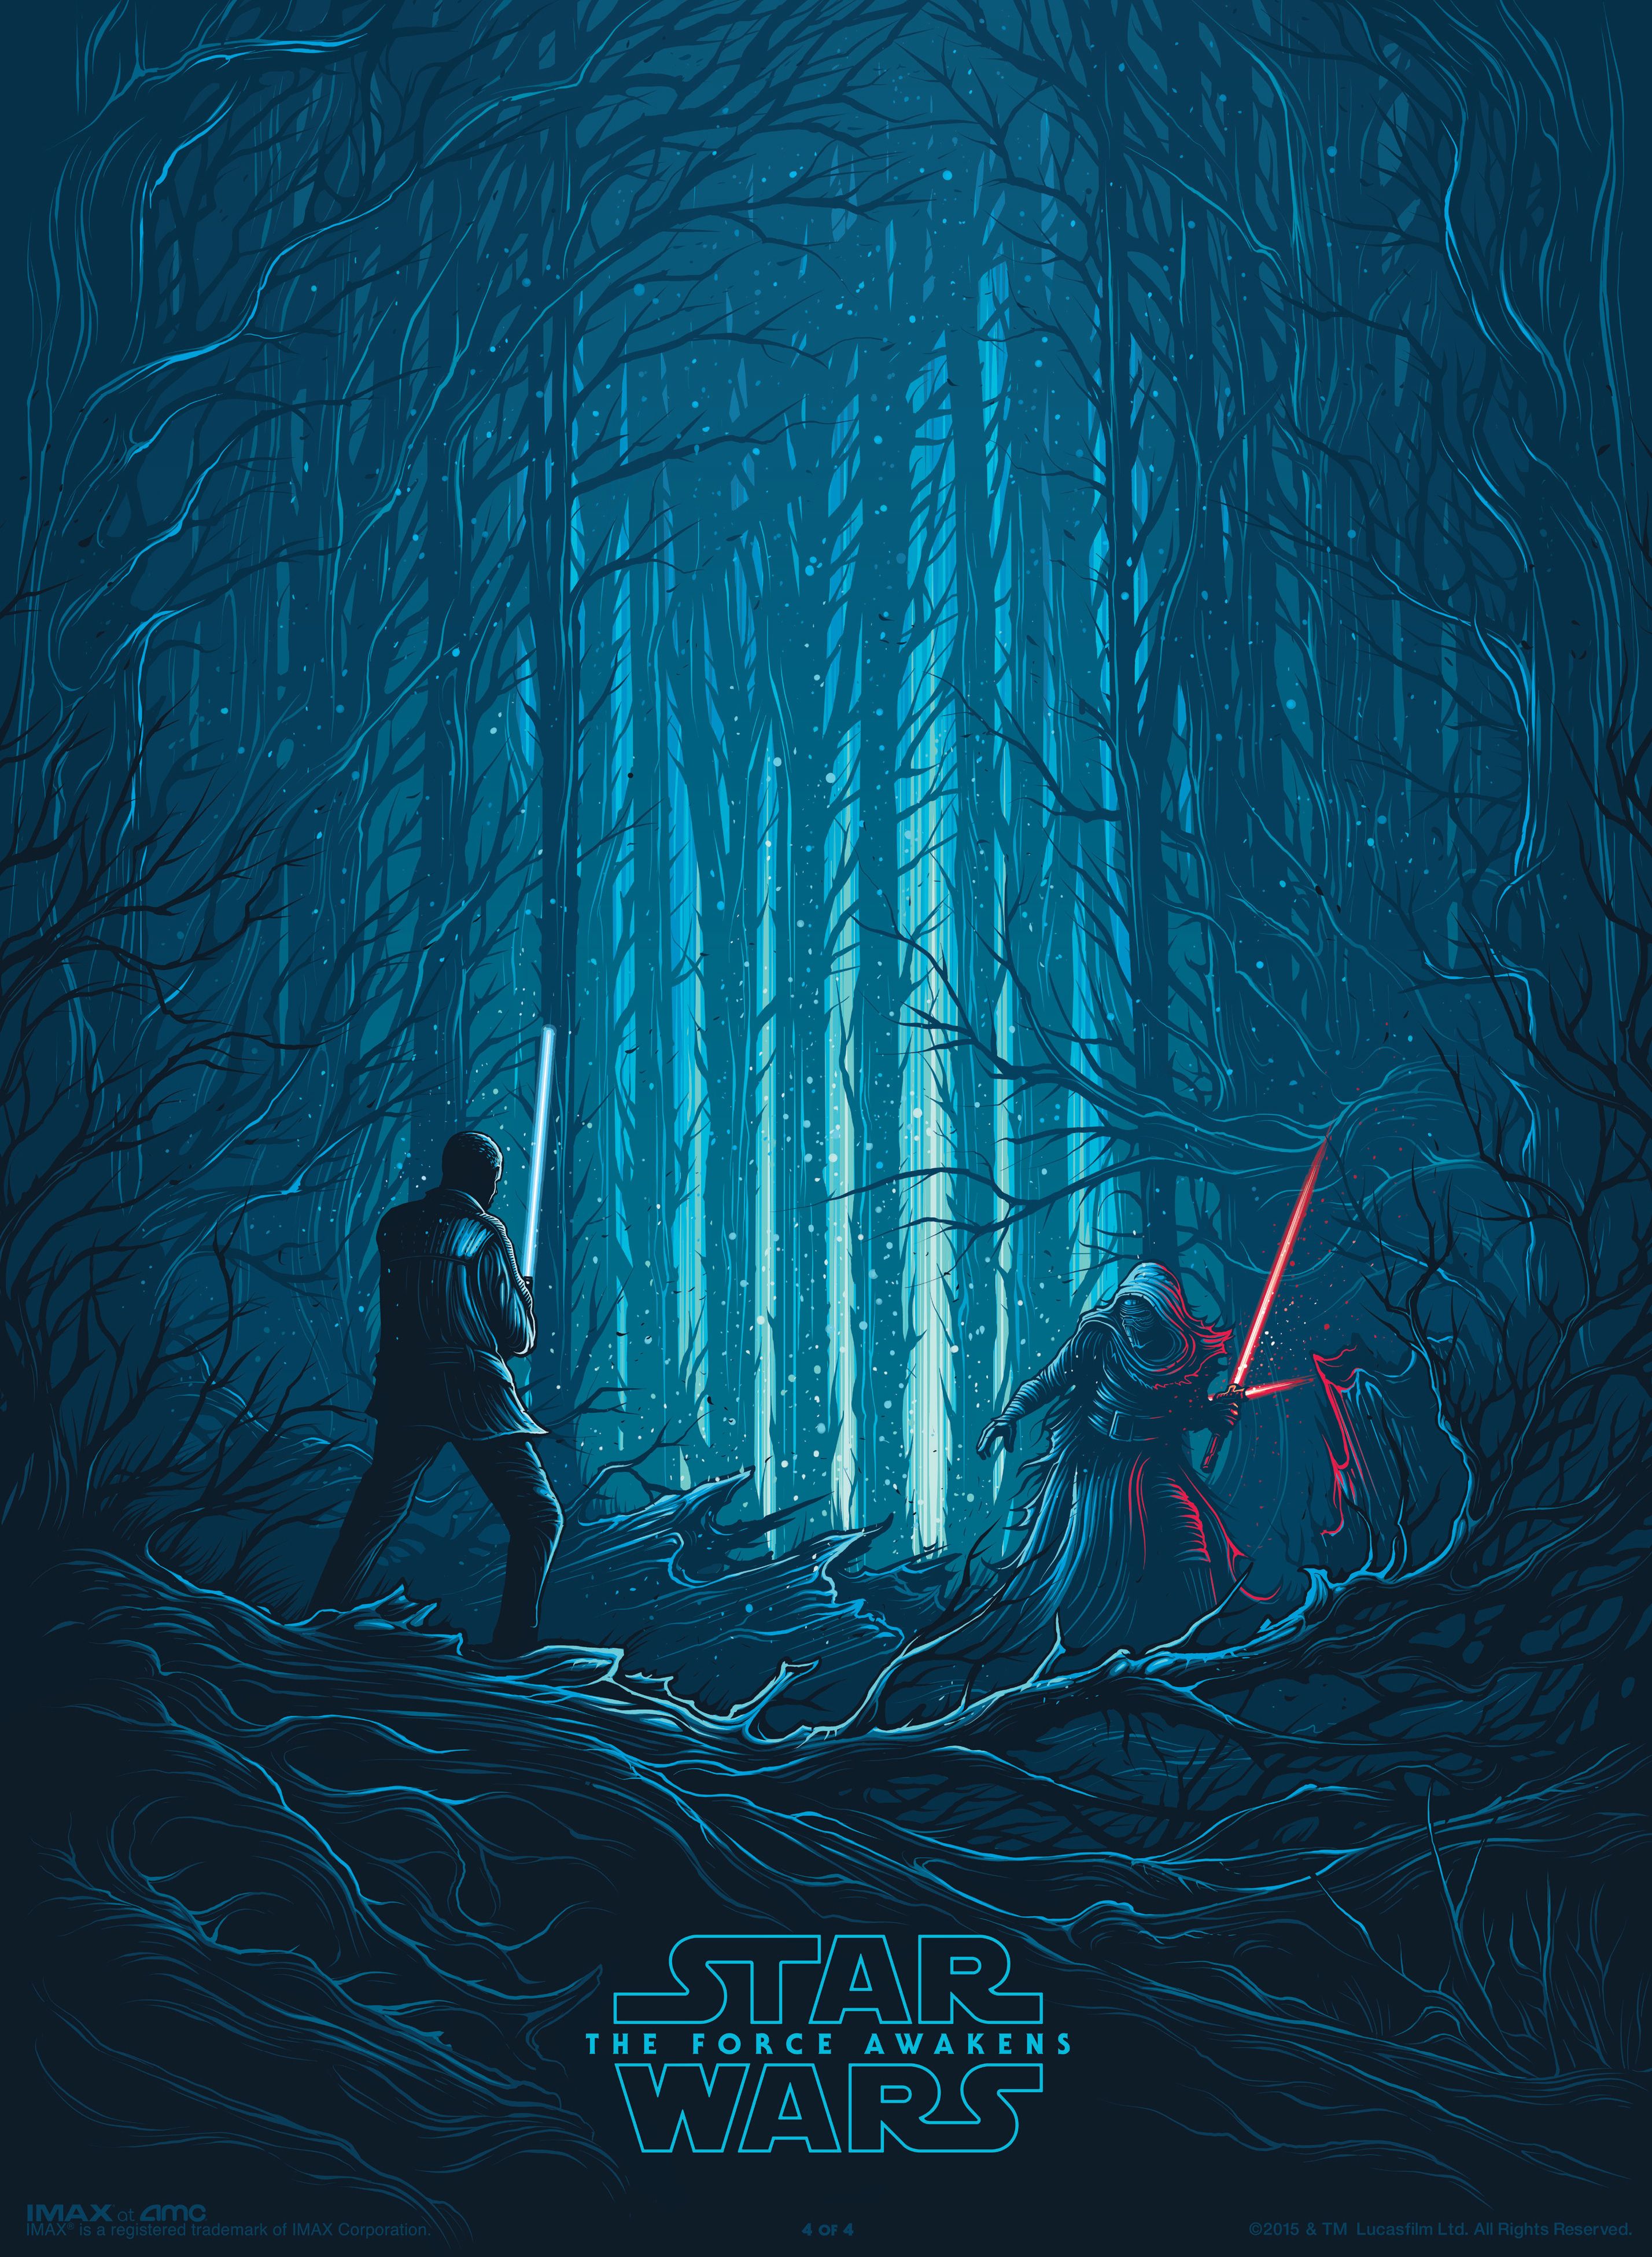 Star Wars The Force Awakens Amc Imax Theaters Poster Media